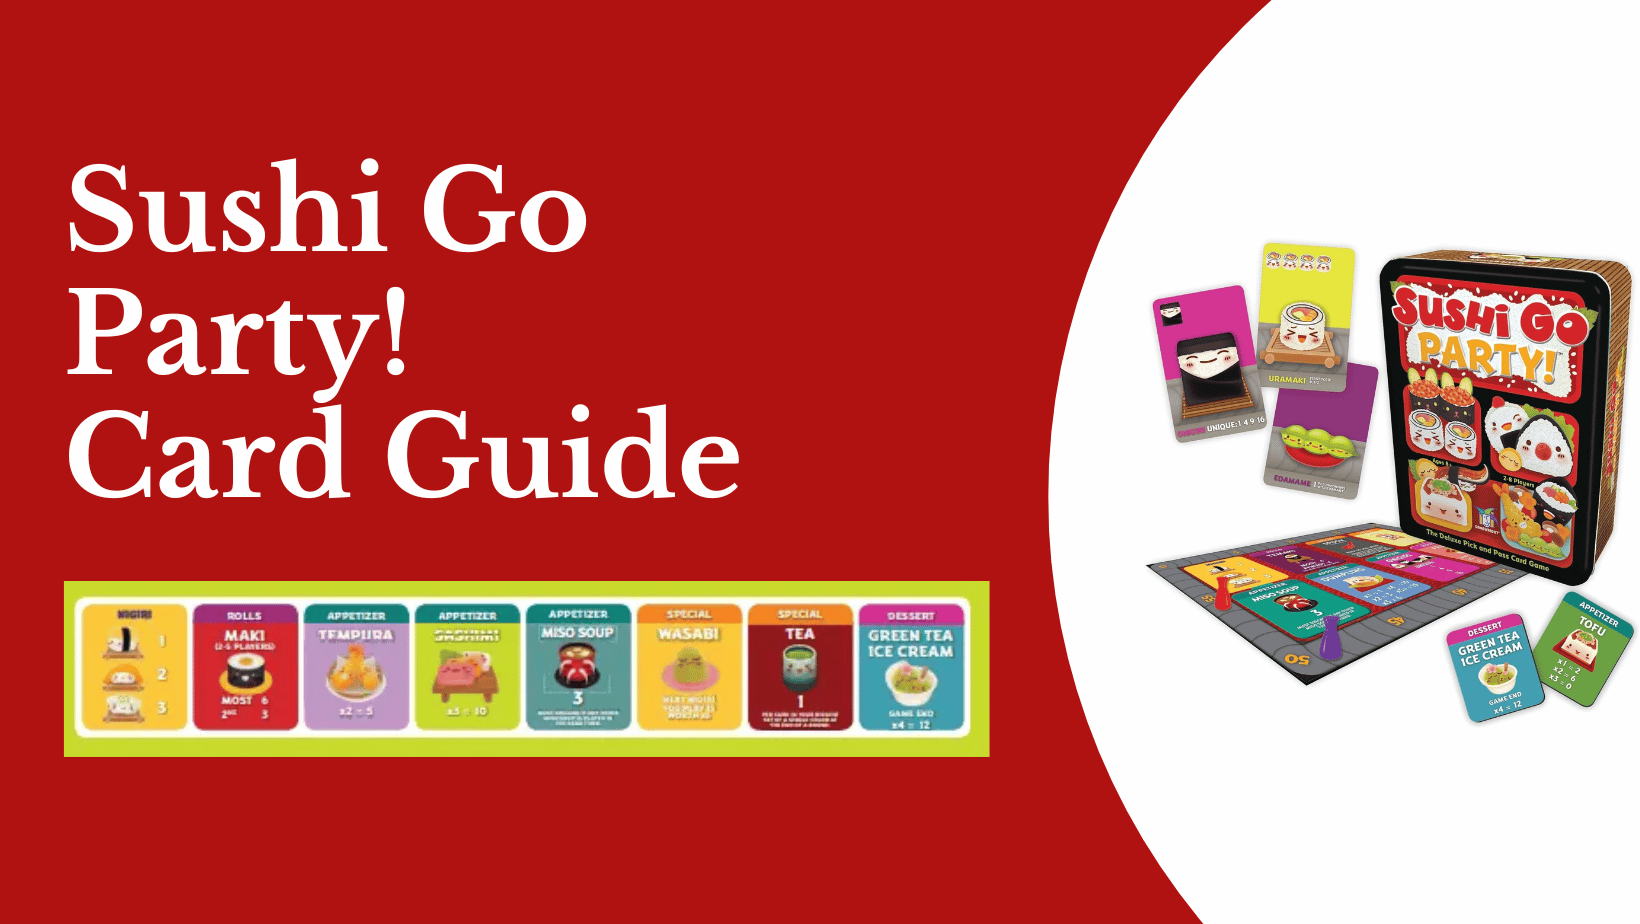 Sushi Go Party Card Guide